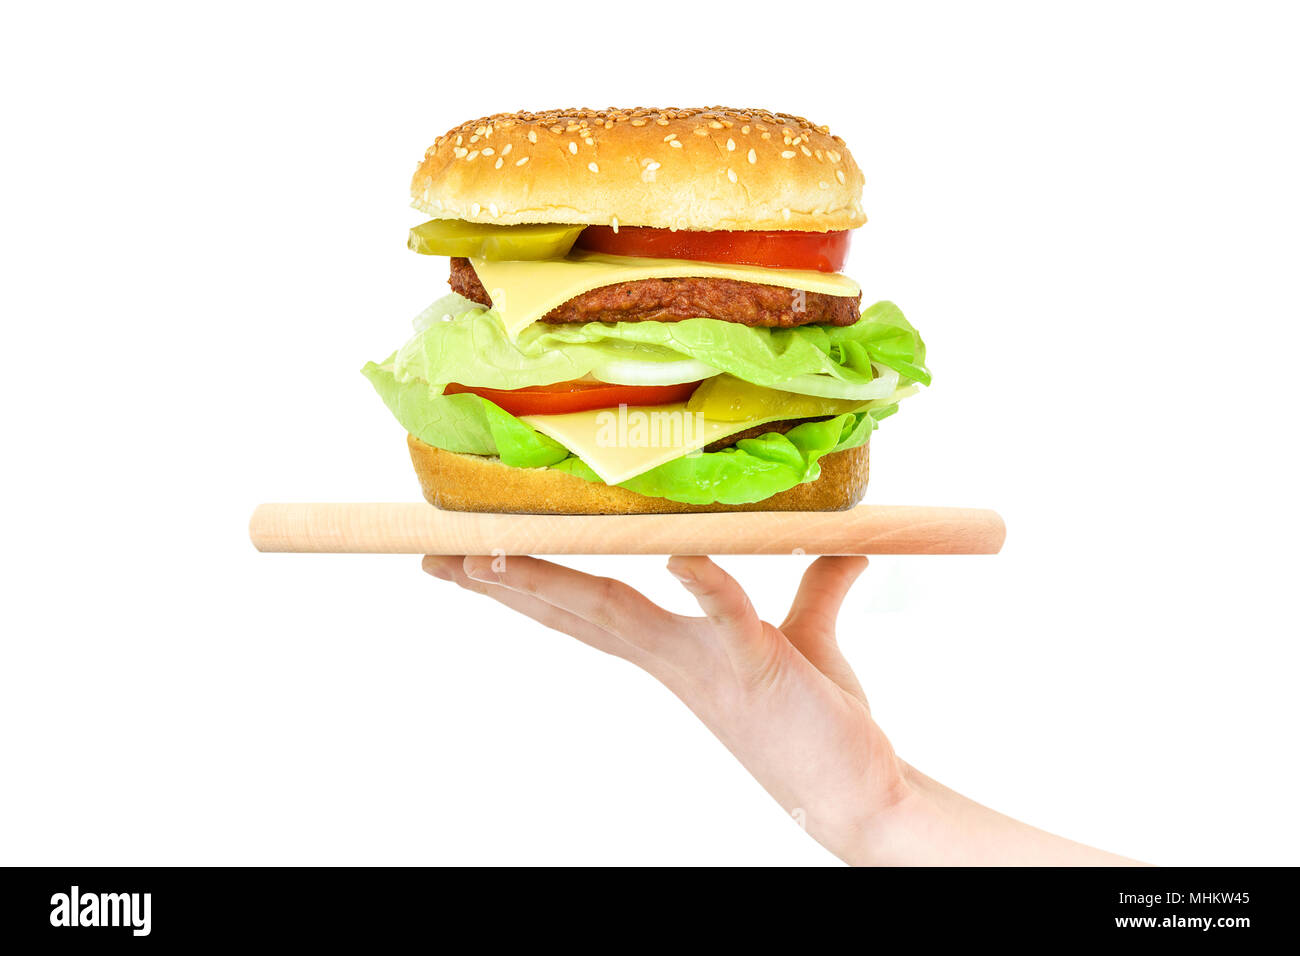 Concept of food serving service - female hand holding a wooden board with a big hamburger on a white background (mixed) Stock Photo